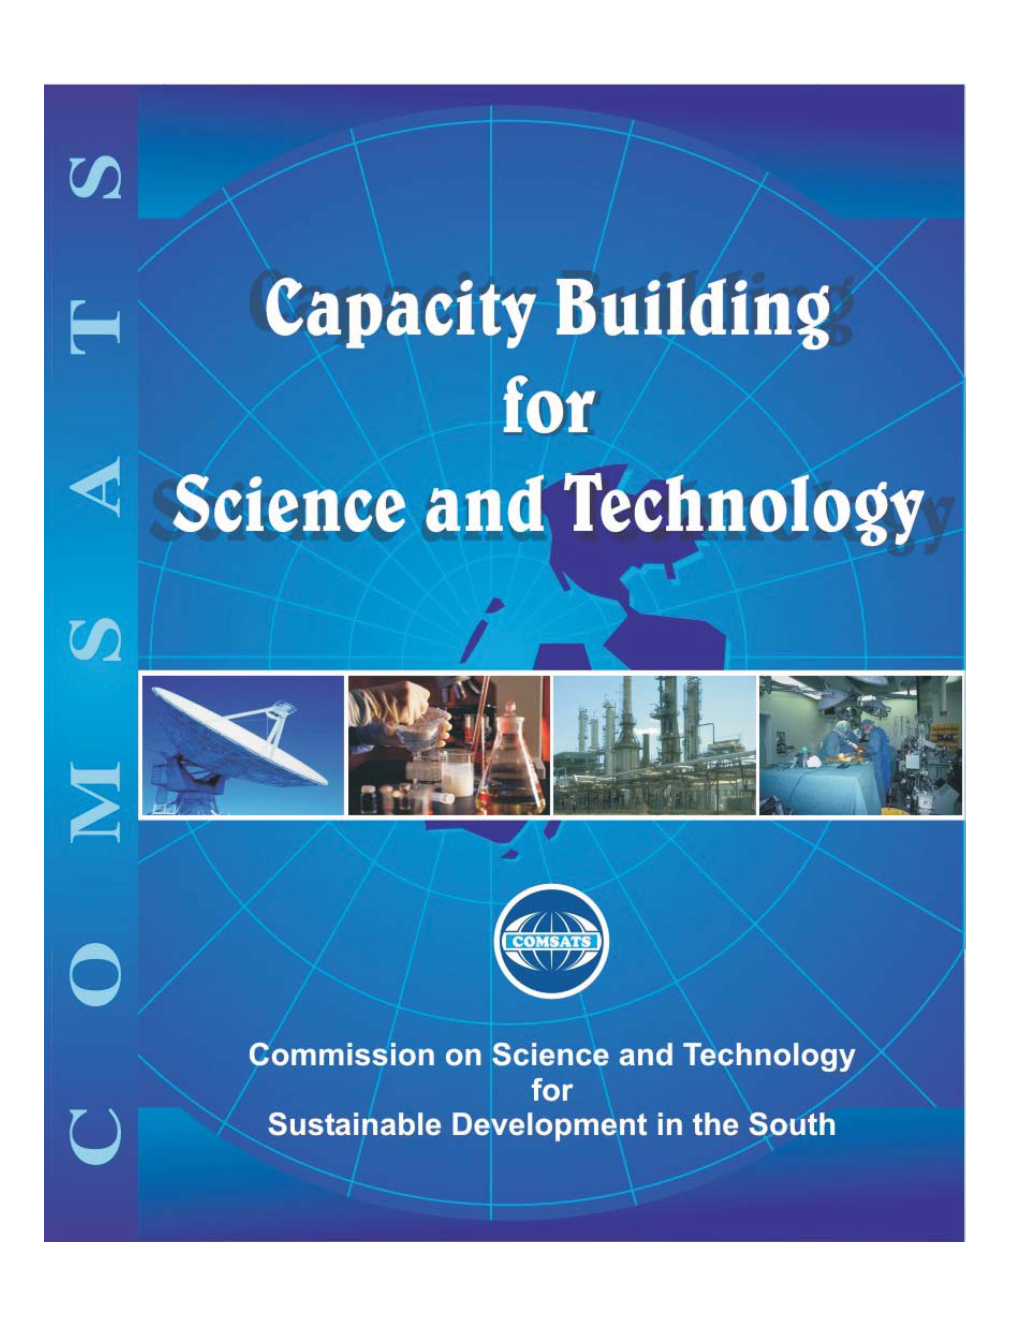 Capacity Building for Science and Technology (May 2003)